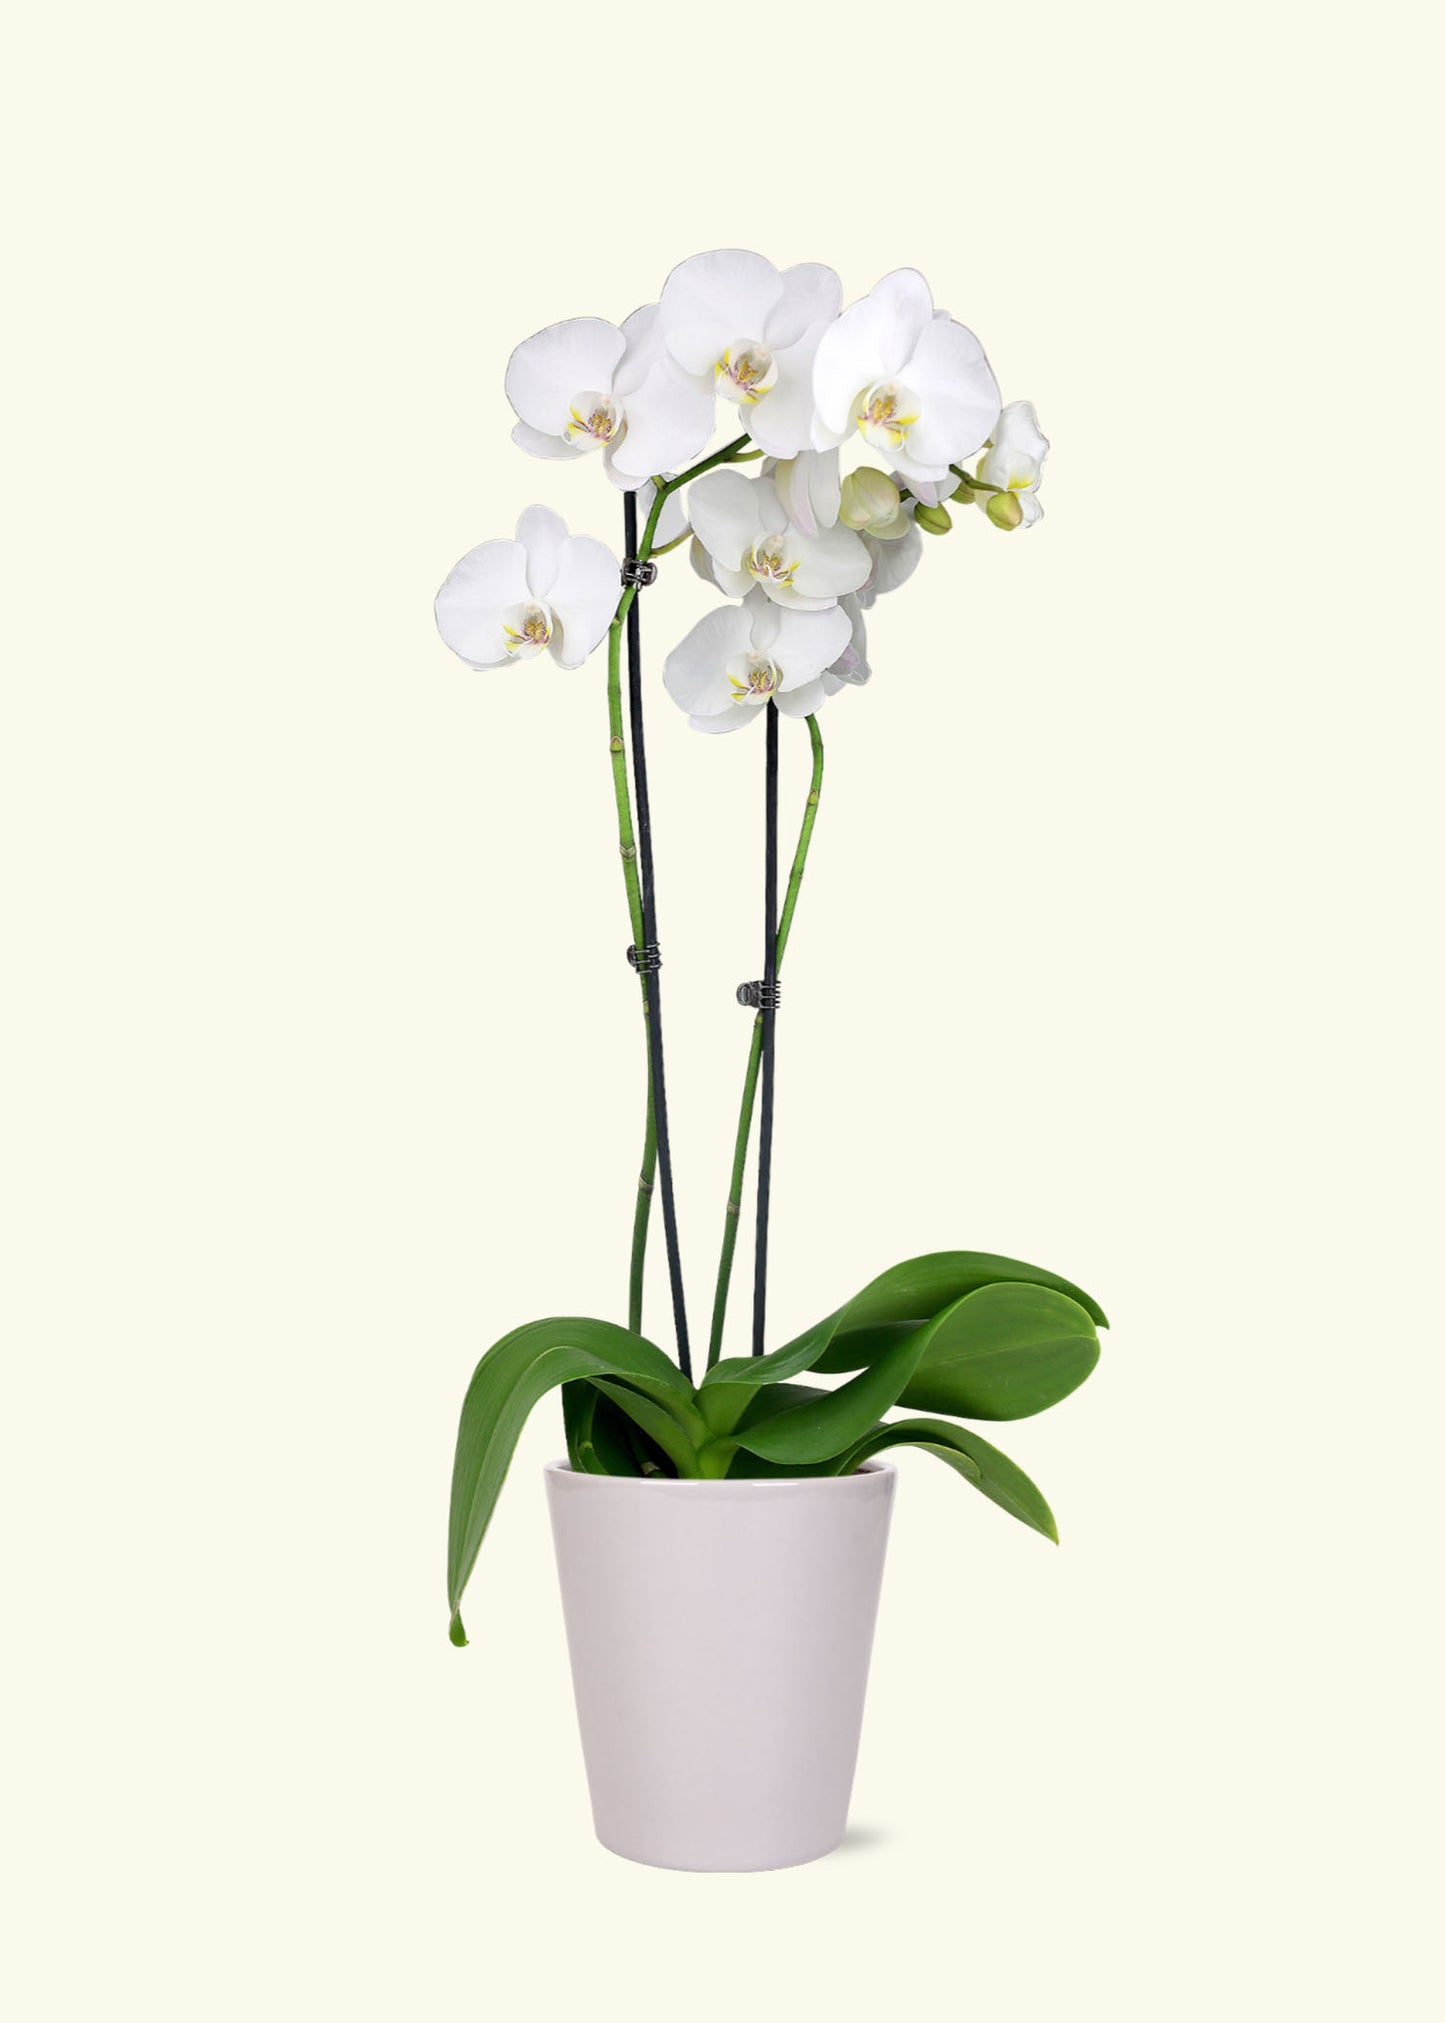 Small White Orchid in a grey quinn ceramic grow pot.